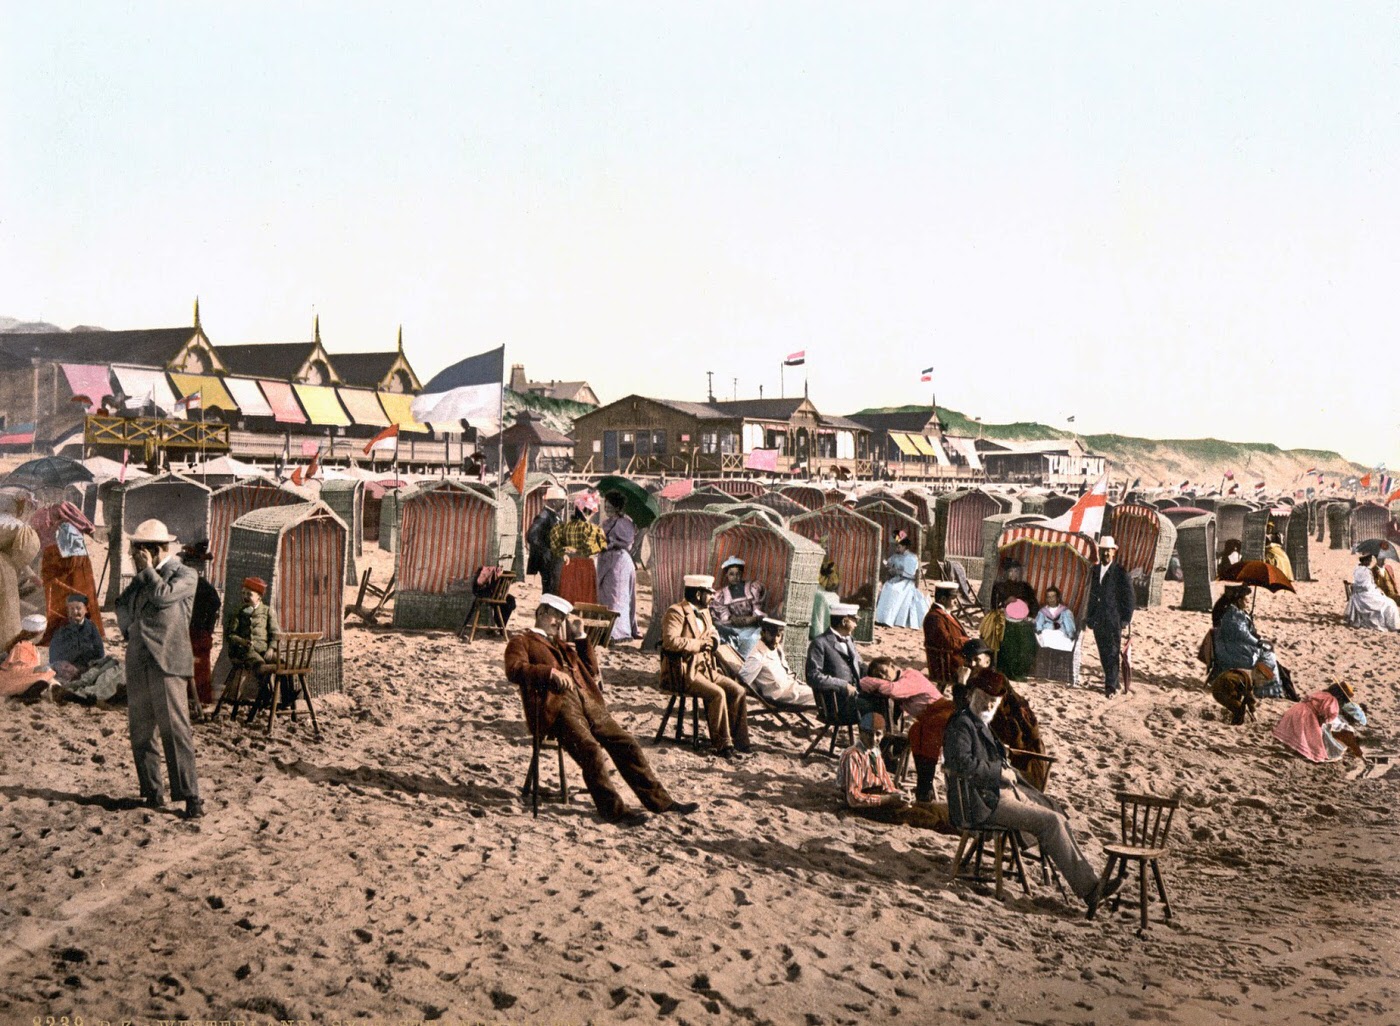 The chalets, Westerland, Sylt, Schleswig-Holstein, Germany, 1890